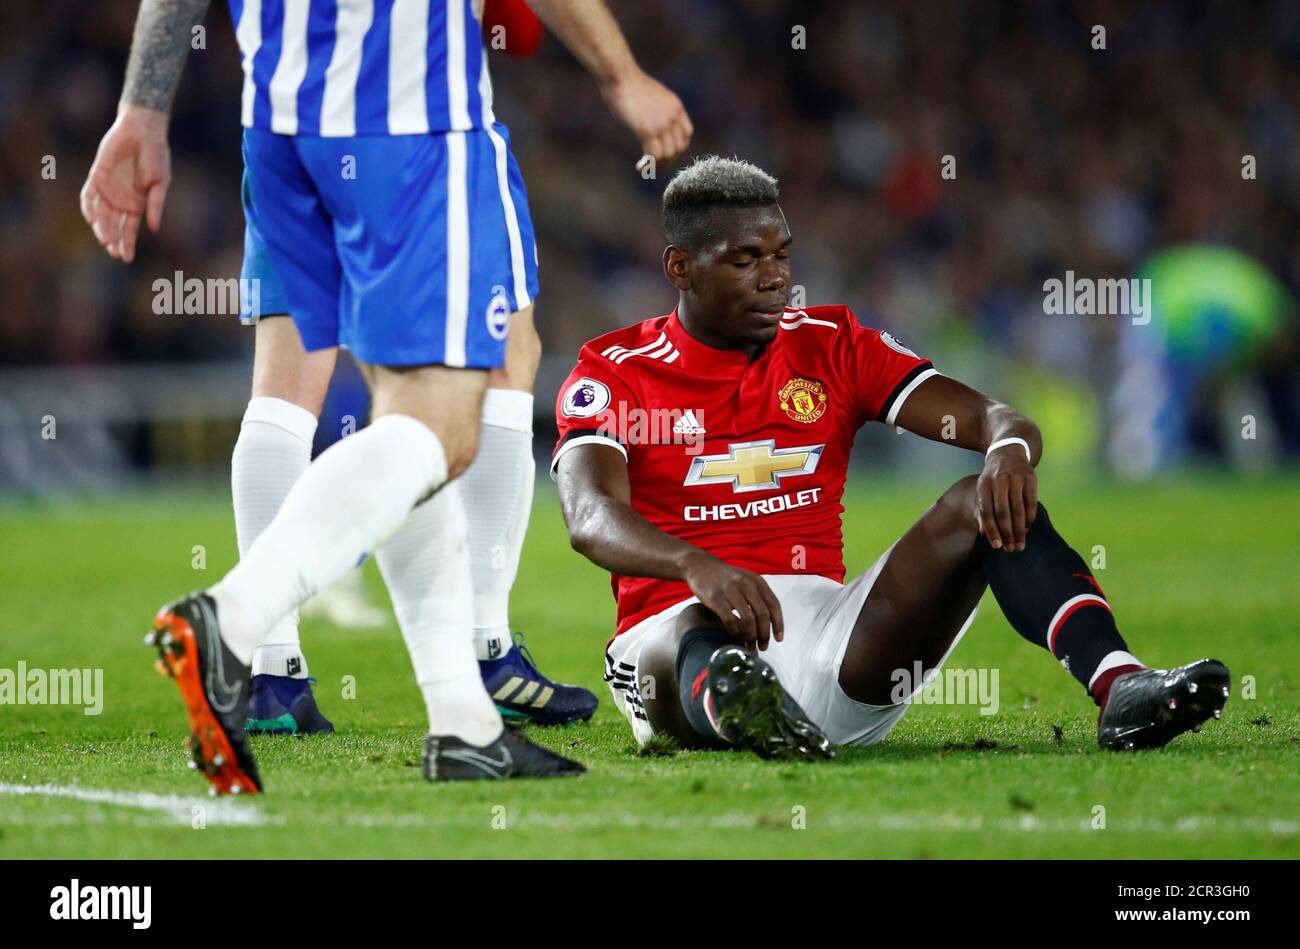 Soccer Football - Premier League - Brighton & Hove Albion v Manchester United - The American Express Community Stadium, Brighton, Britain - May 4, 2018   Manchester United's Paul Pogba reacts   REUTERS/Eddie Keogh    EDITORIAL USE ONLY. No use with unauthorized audio, video, data, fixture lists, club/league logos or "live" services. Online in-match use limited to 75 images, no video emulation. No use in betting, games or single club/league/player publications.  Please contact your account representative for further details. Stock Photo